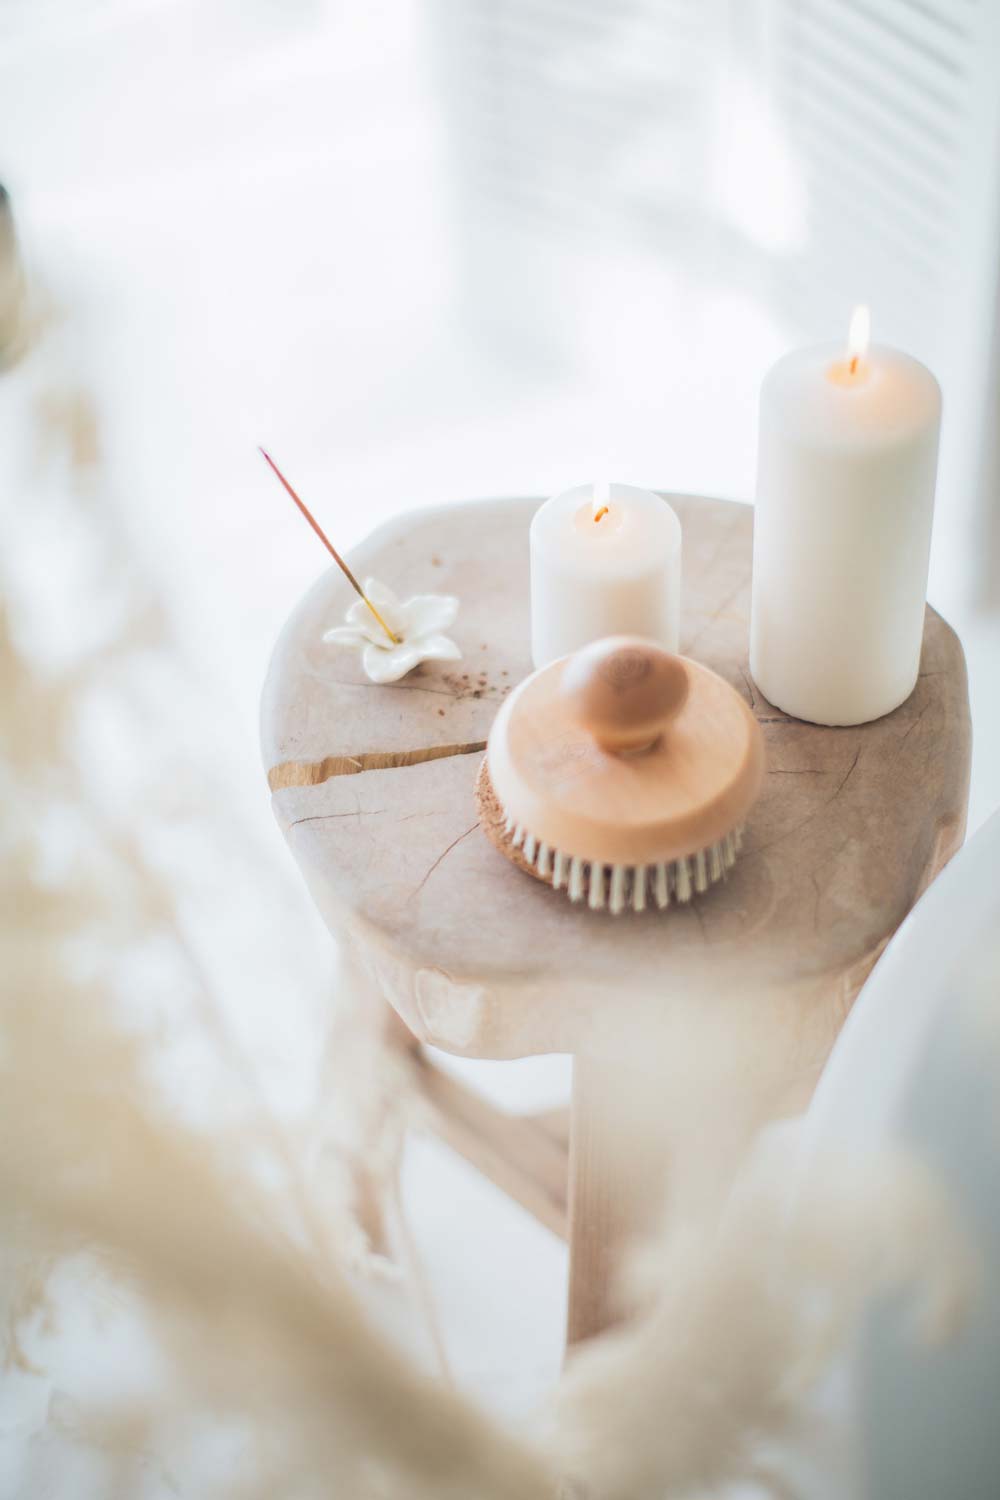 incense-and-white-candles-on-a-stool-3865712